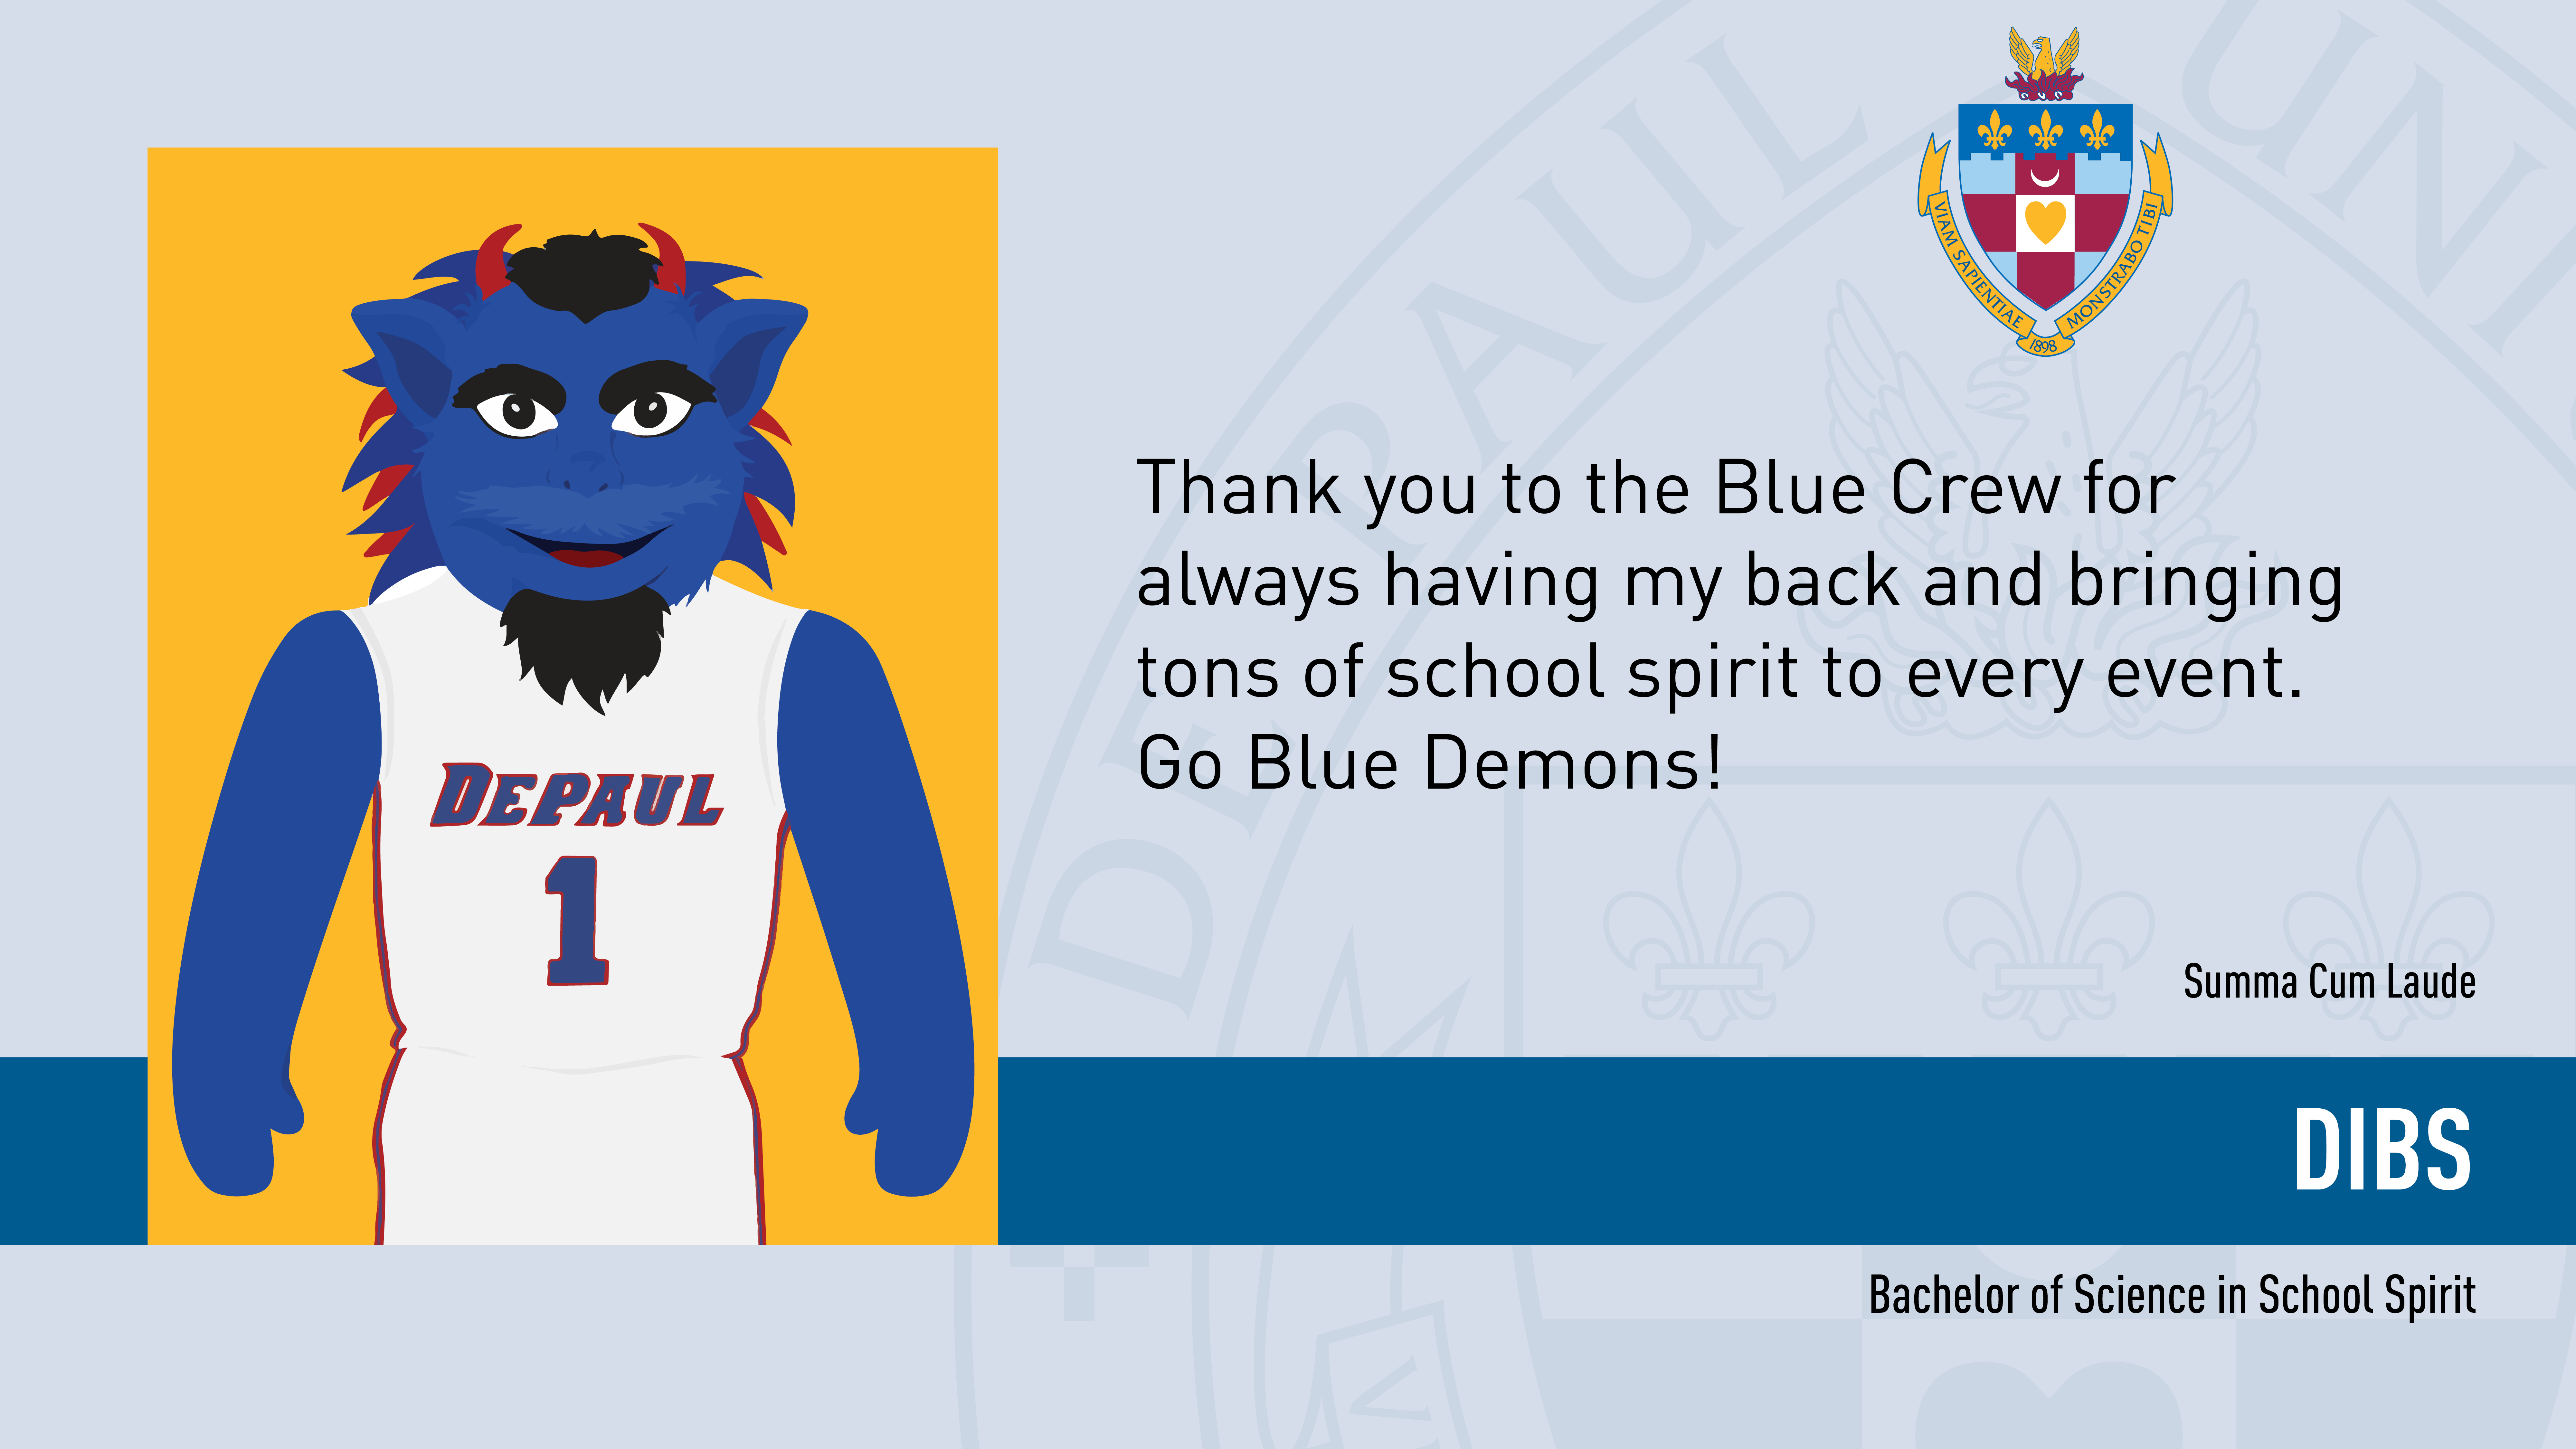 DePaul's mascot DIBS personalized his Marching Order slide for the upcoming online ceremonies 